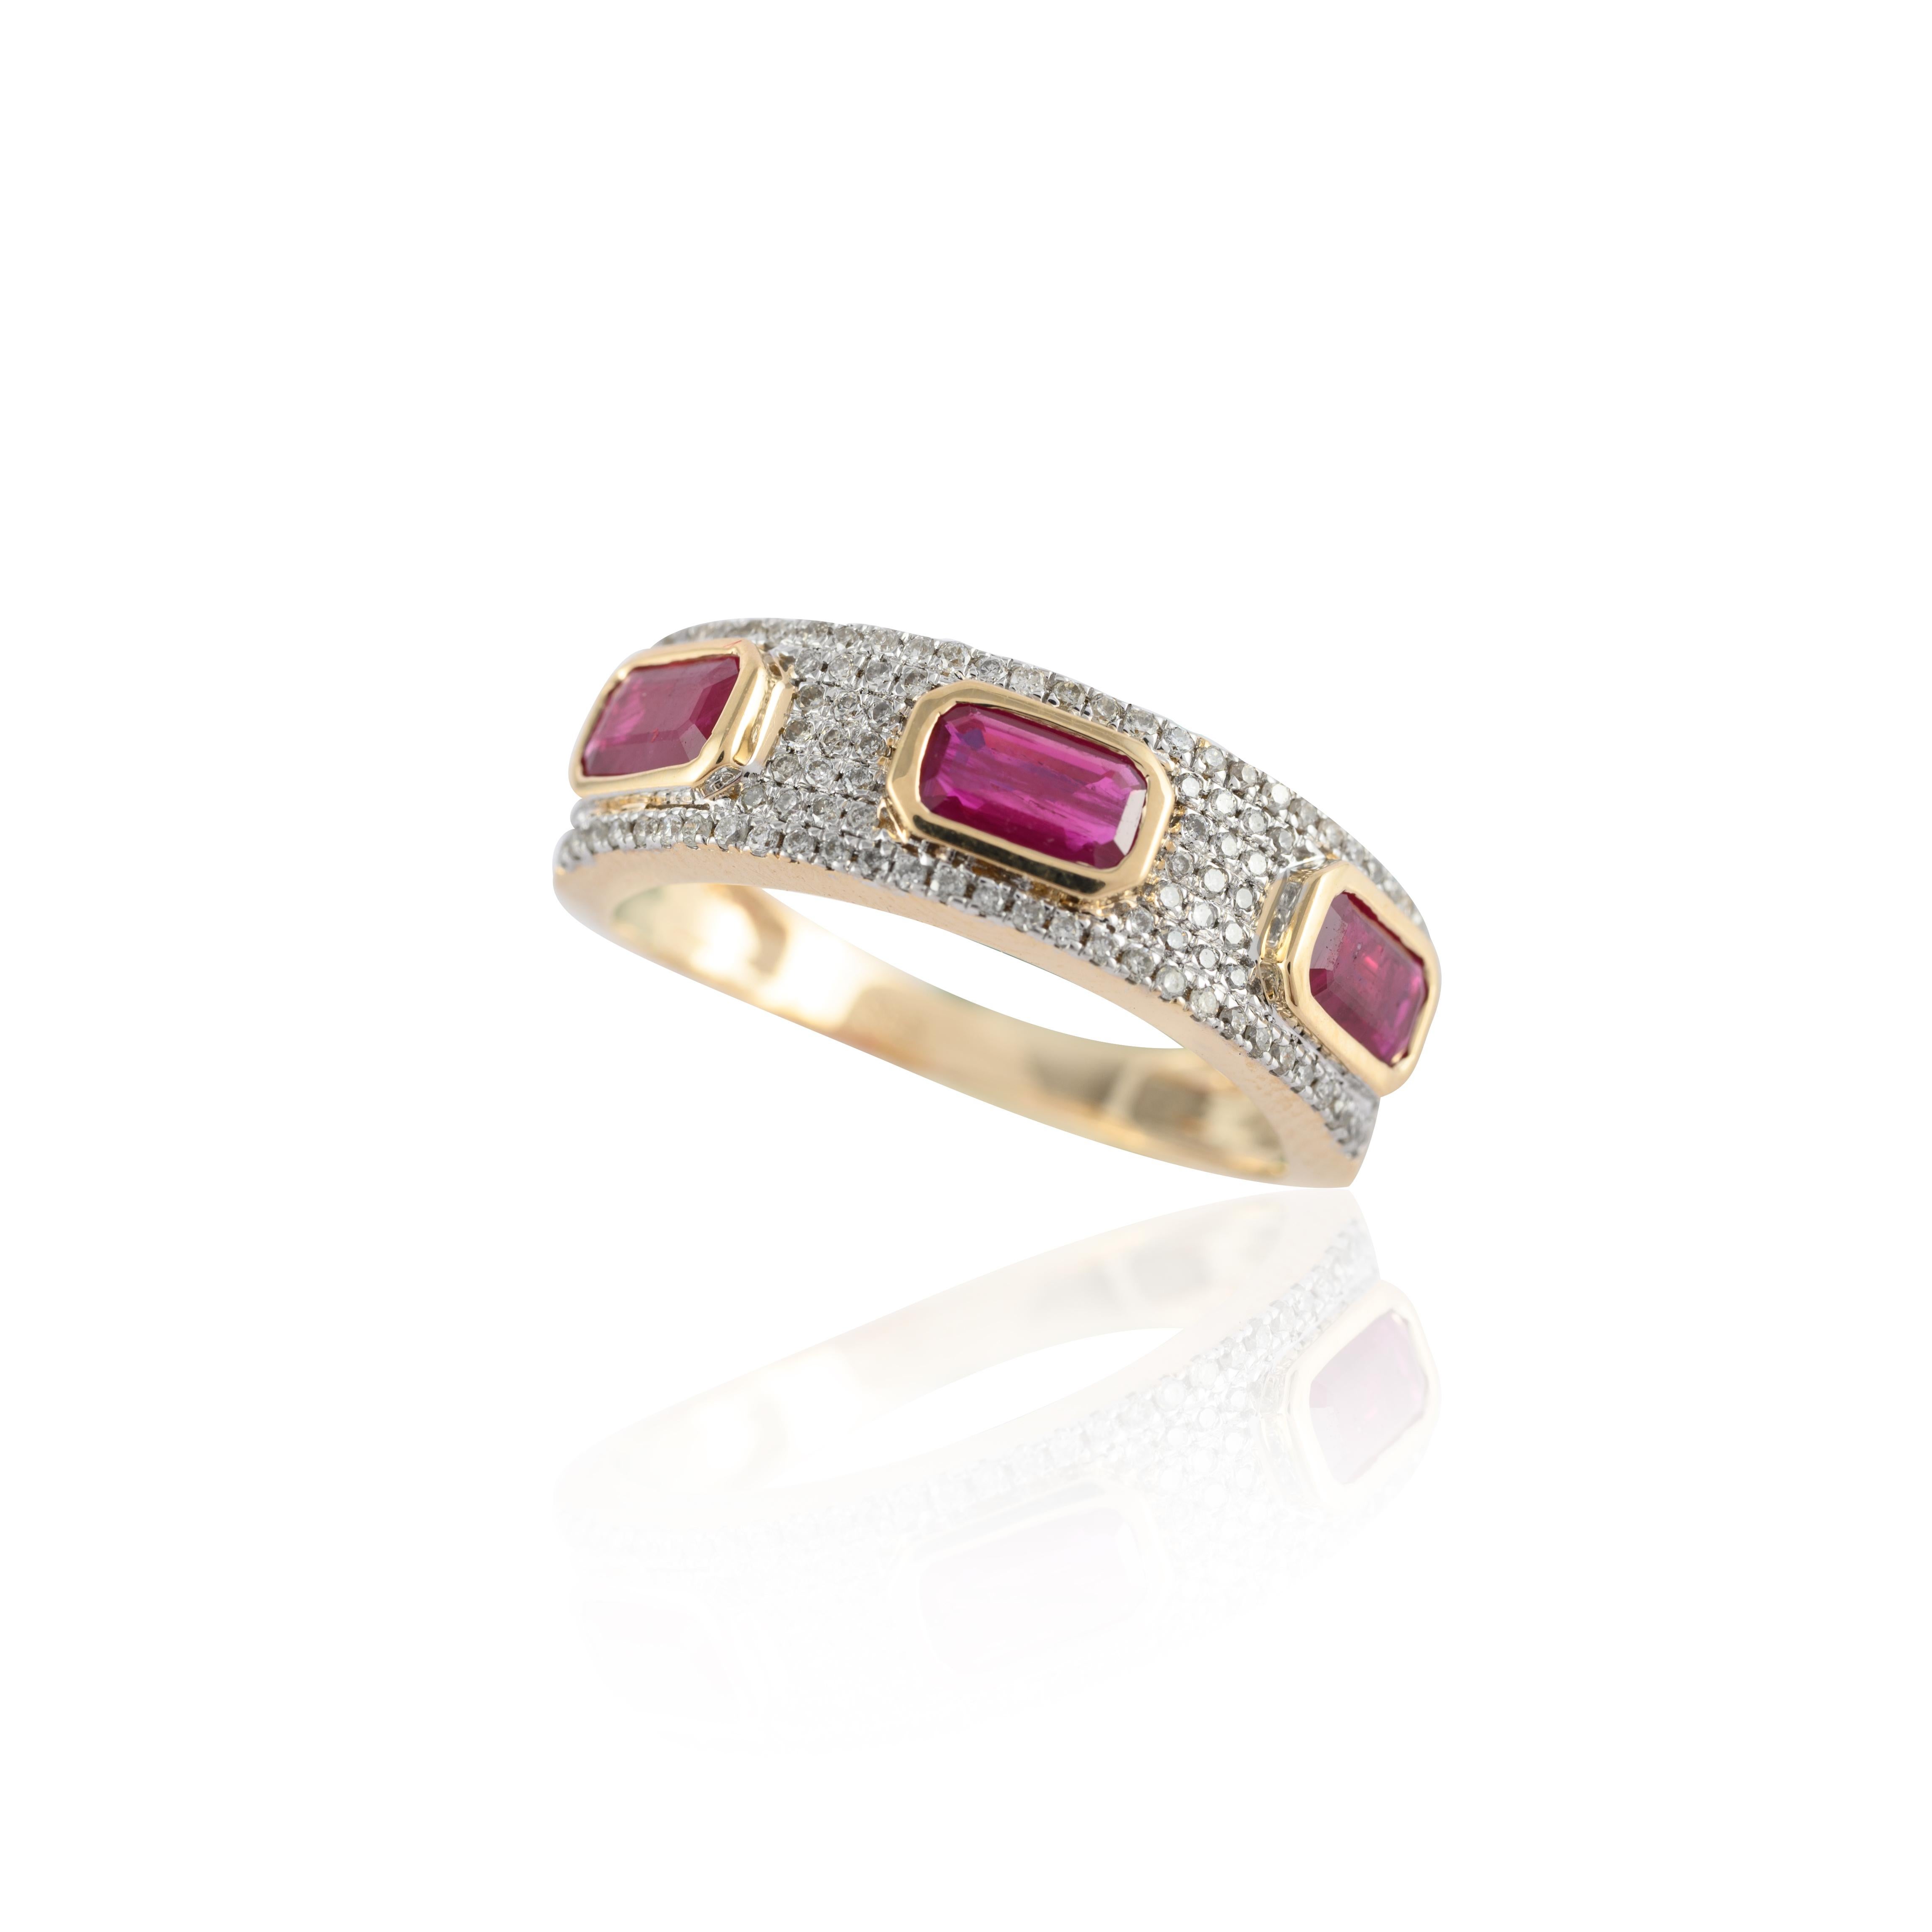 For Sale:  Statement Diamond and Ruby Wedding Ring Studded in 14k Solid Yellow Gold 5